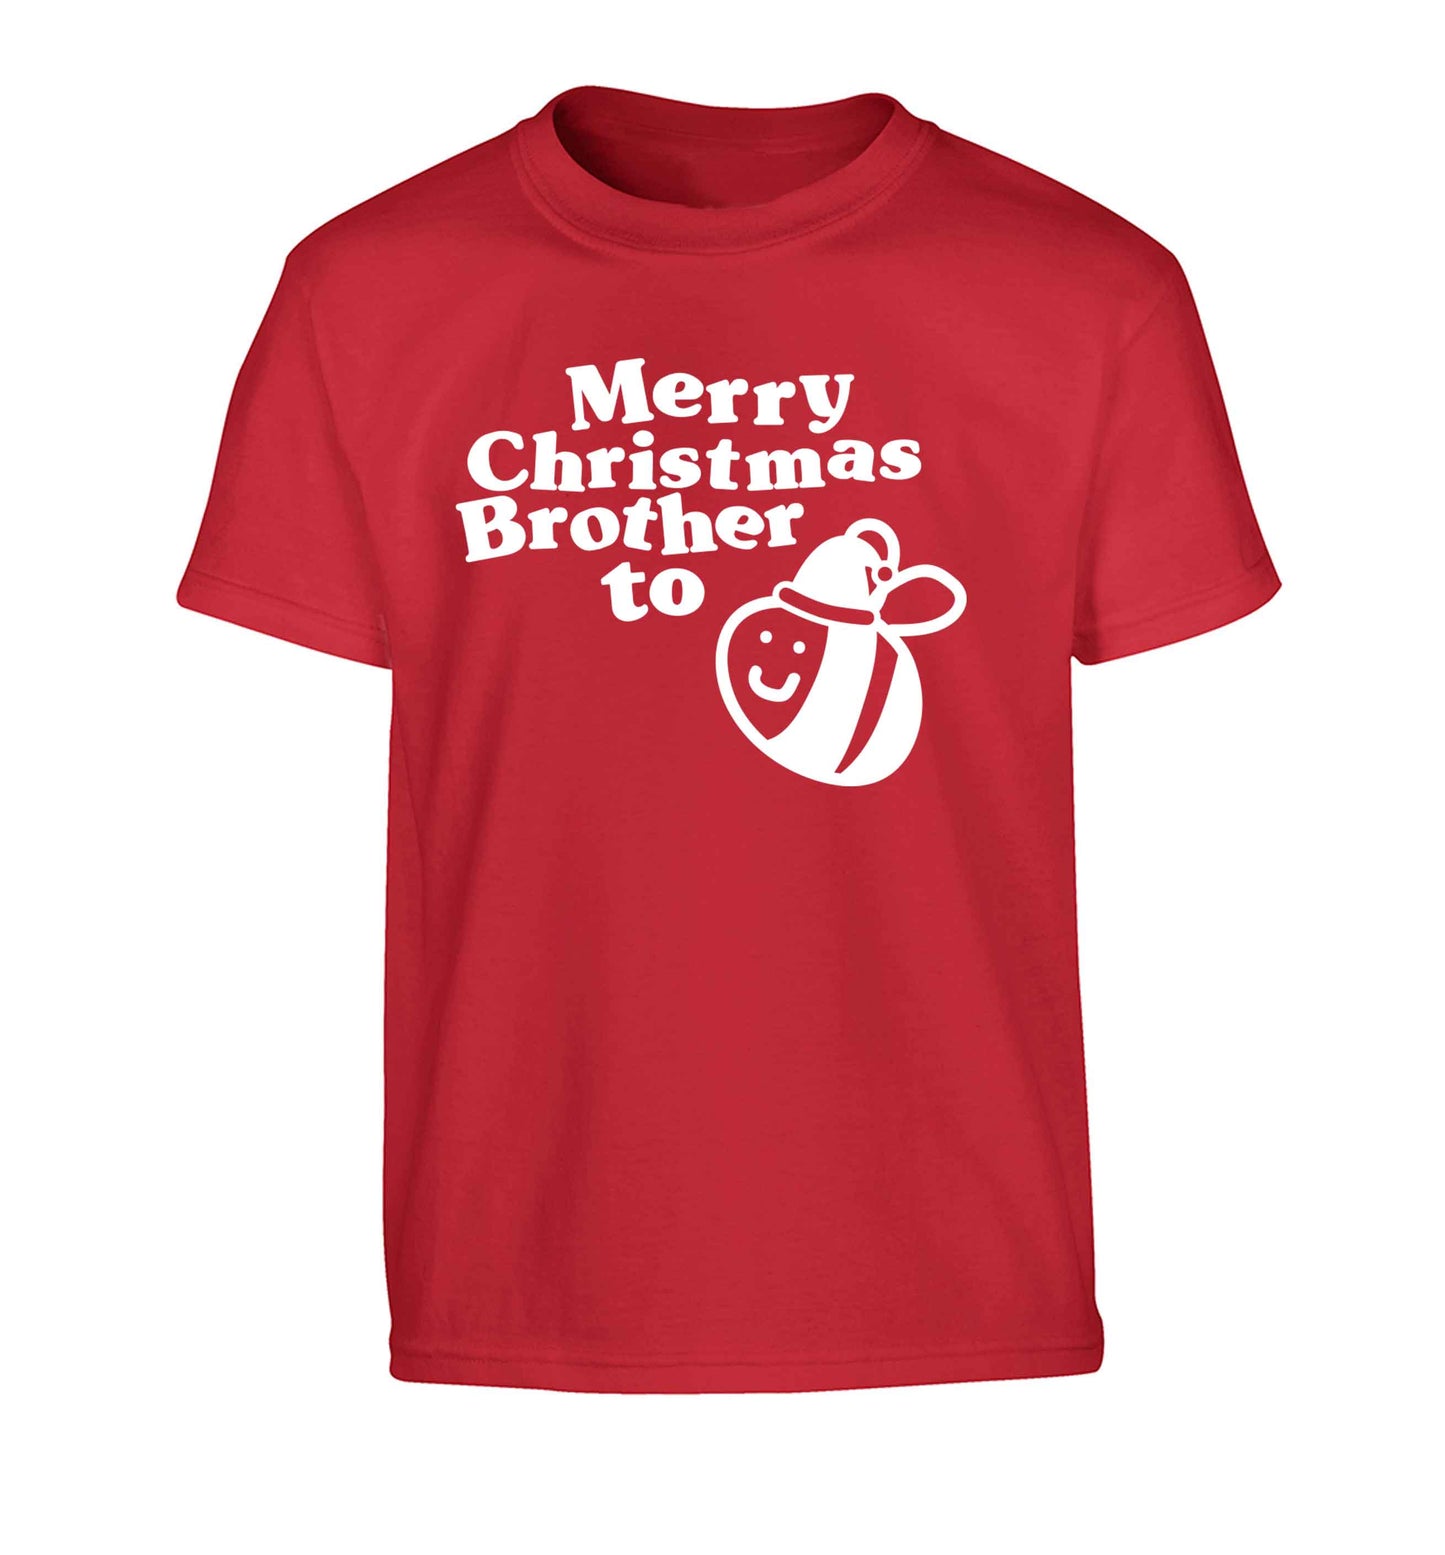 Merry Christmas brother to be Children's red Tshirt 12-13 Years